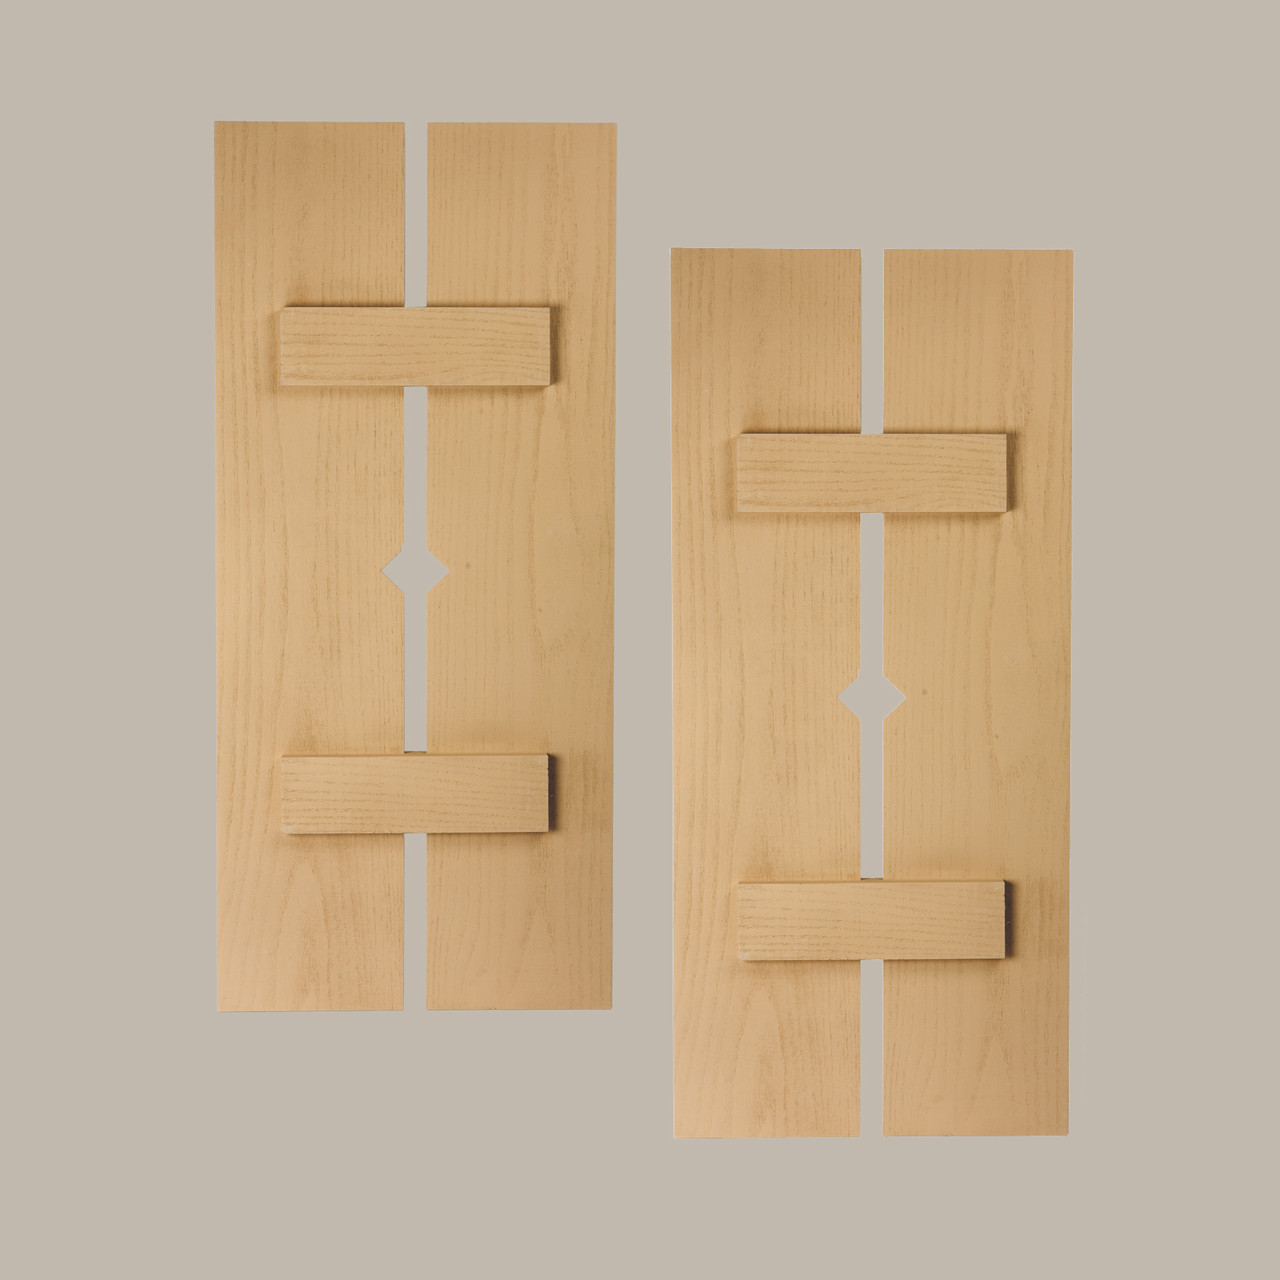 12 inch by 77 inch Plank Shutter with 2-Plank, Diamond